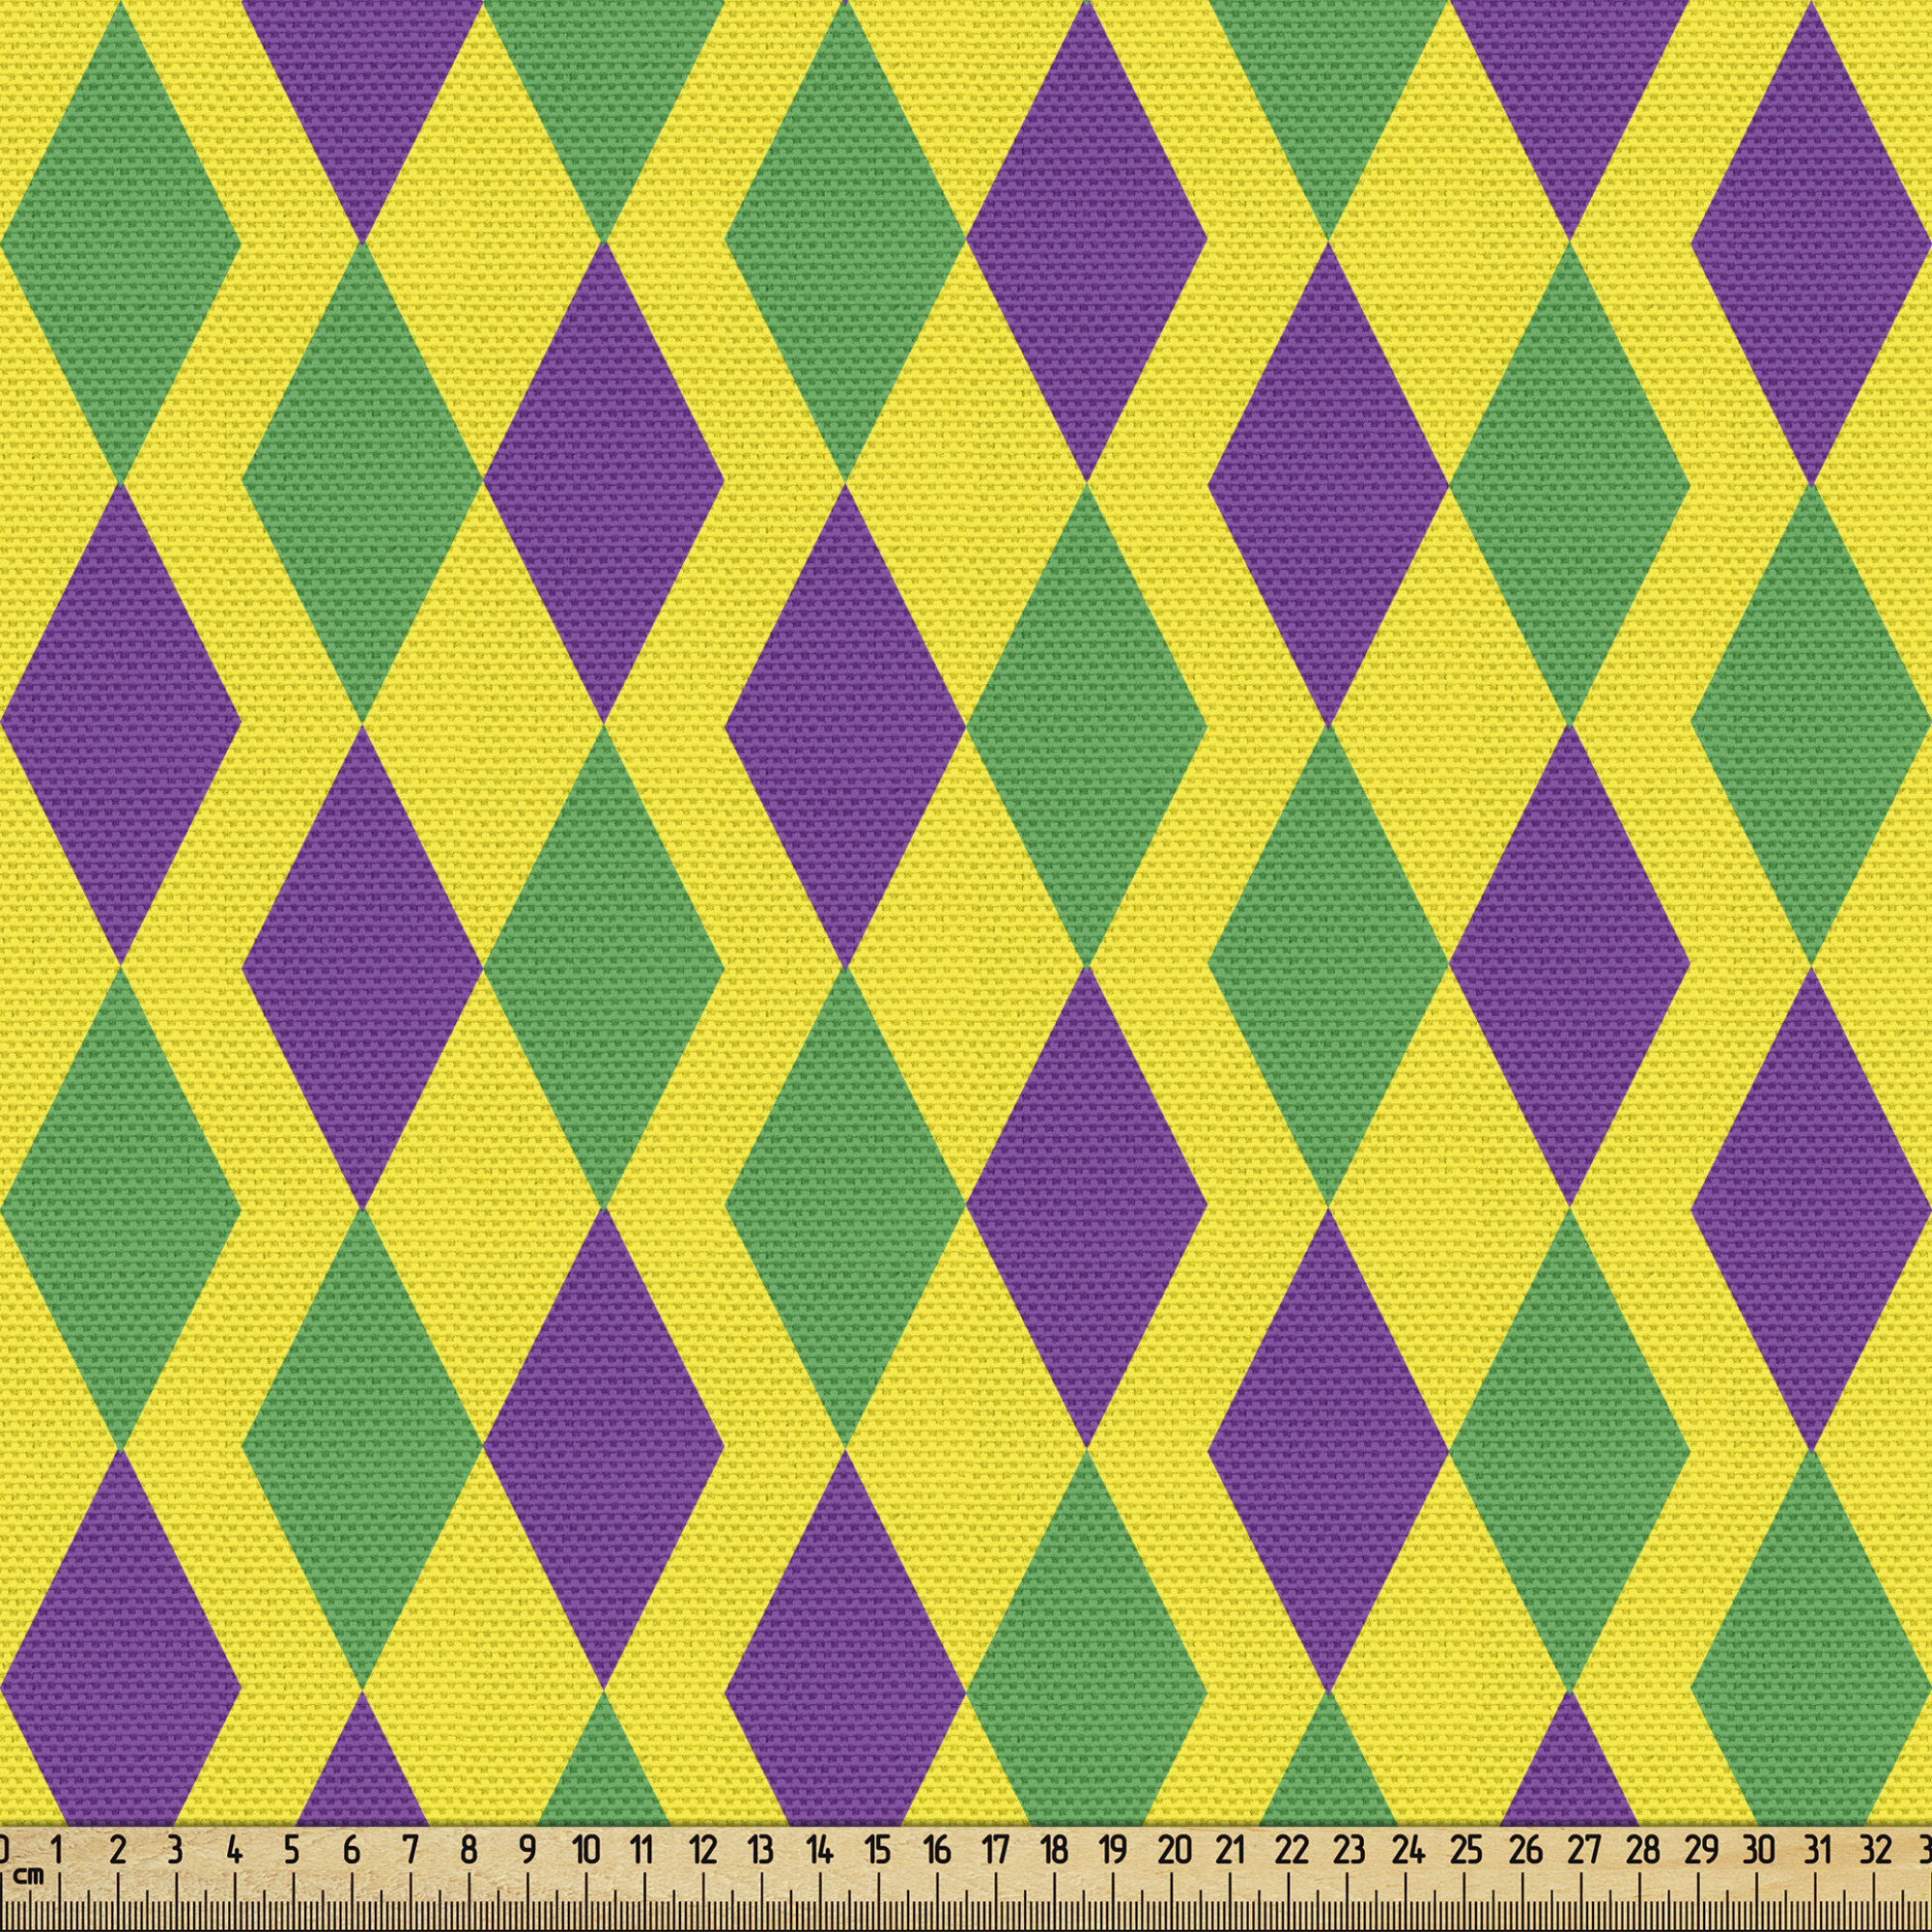 East Urban Home Green and Purple Fabric by The Yard, Mardi Gras Themed Abstract Geometric Pattern with Rhombuses, Decorative Fabric for Upholstery and Home Accents,Ye